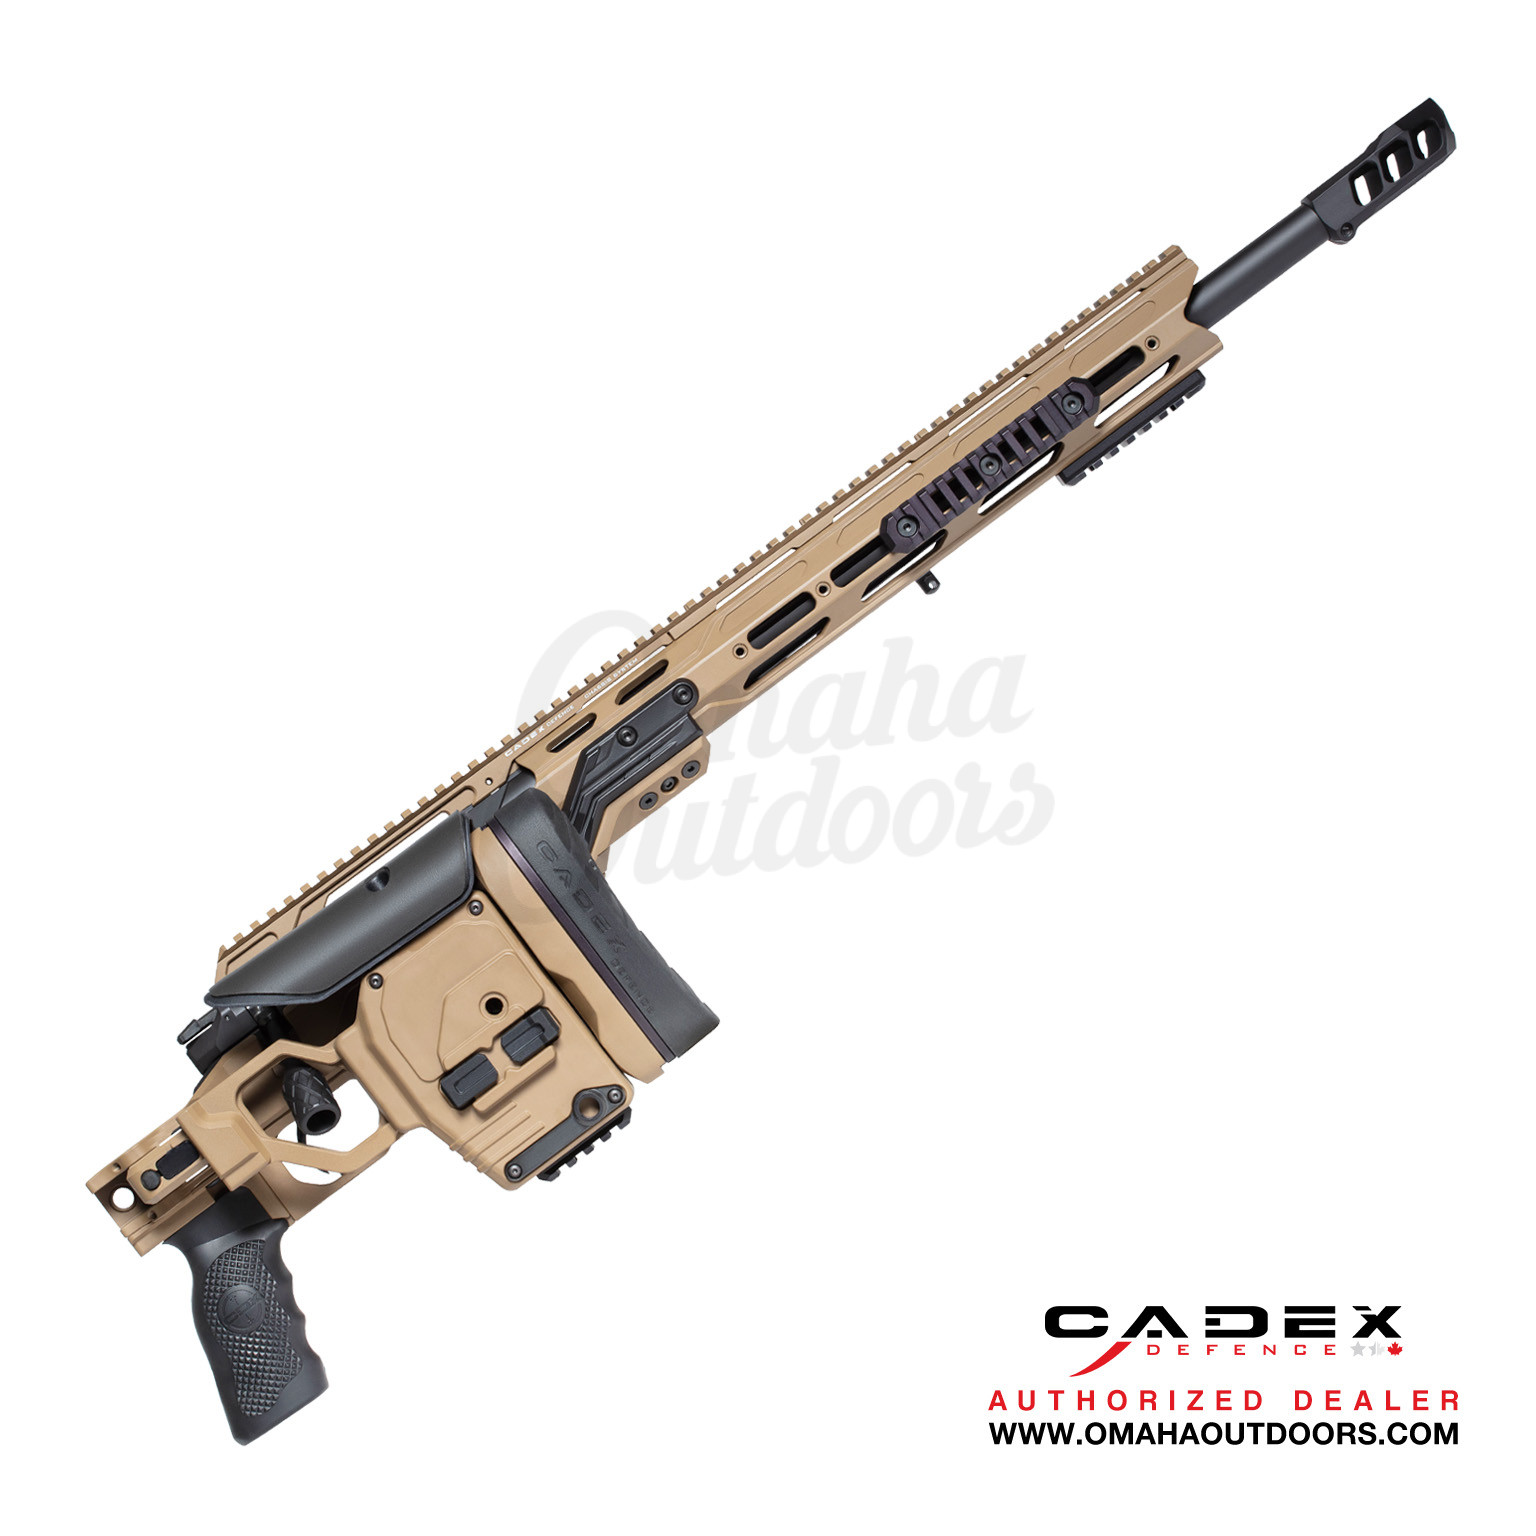 Cadex Defence - People often refer to our MX1 muzzle brake